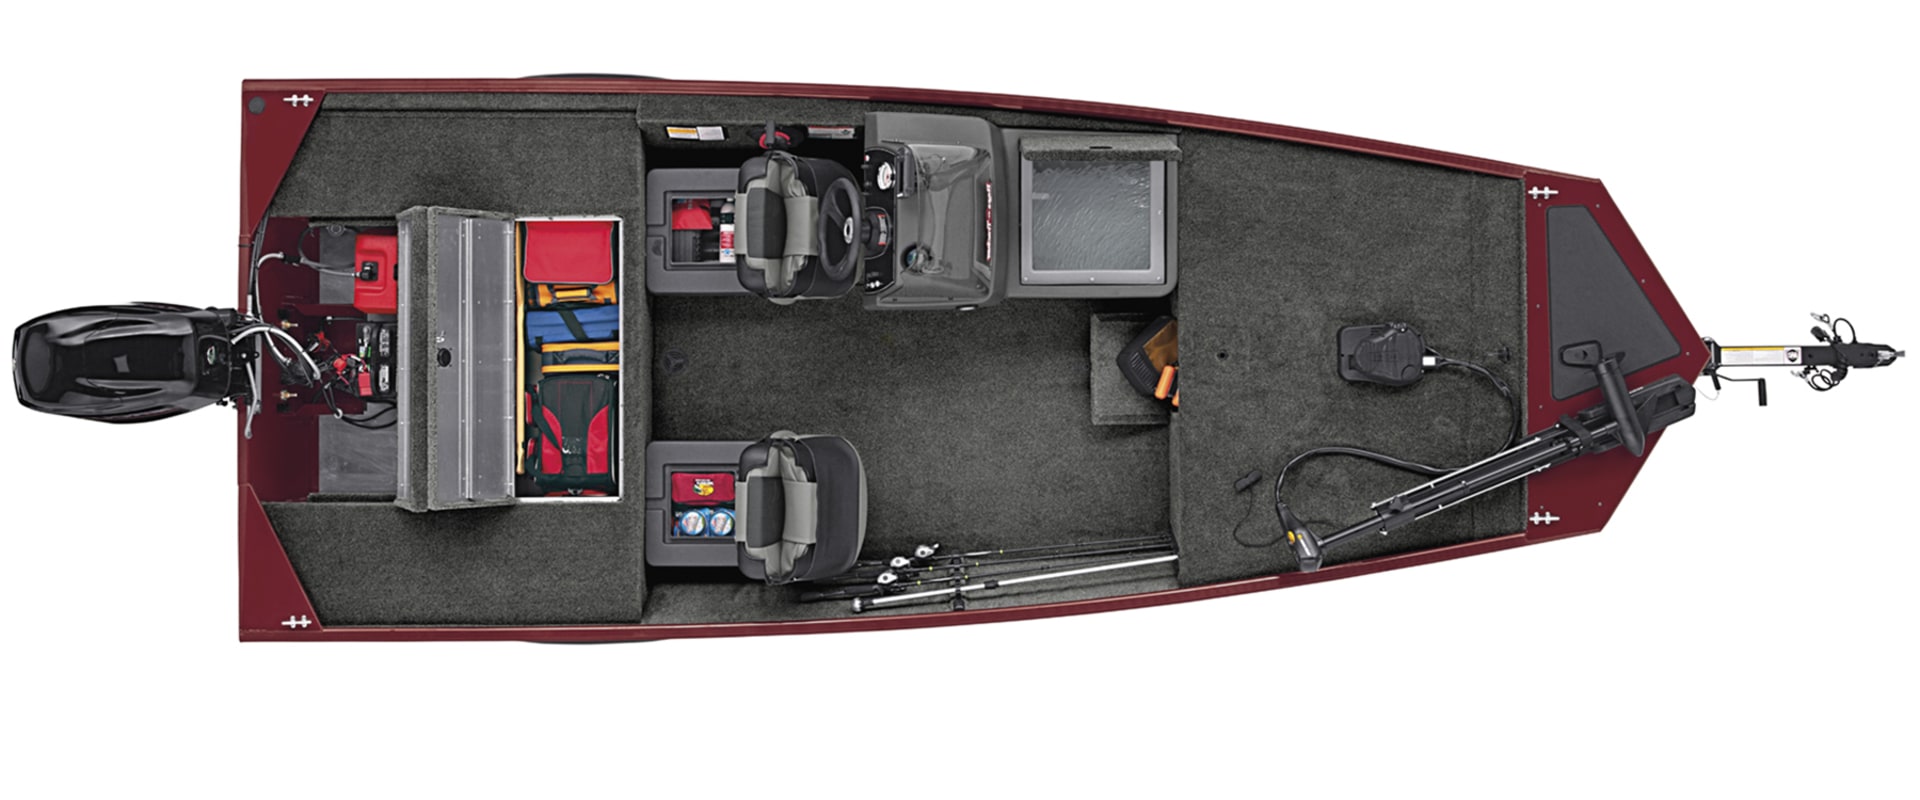 A Complete Overview of Bass Tracker Boats